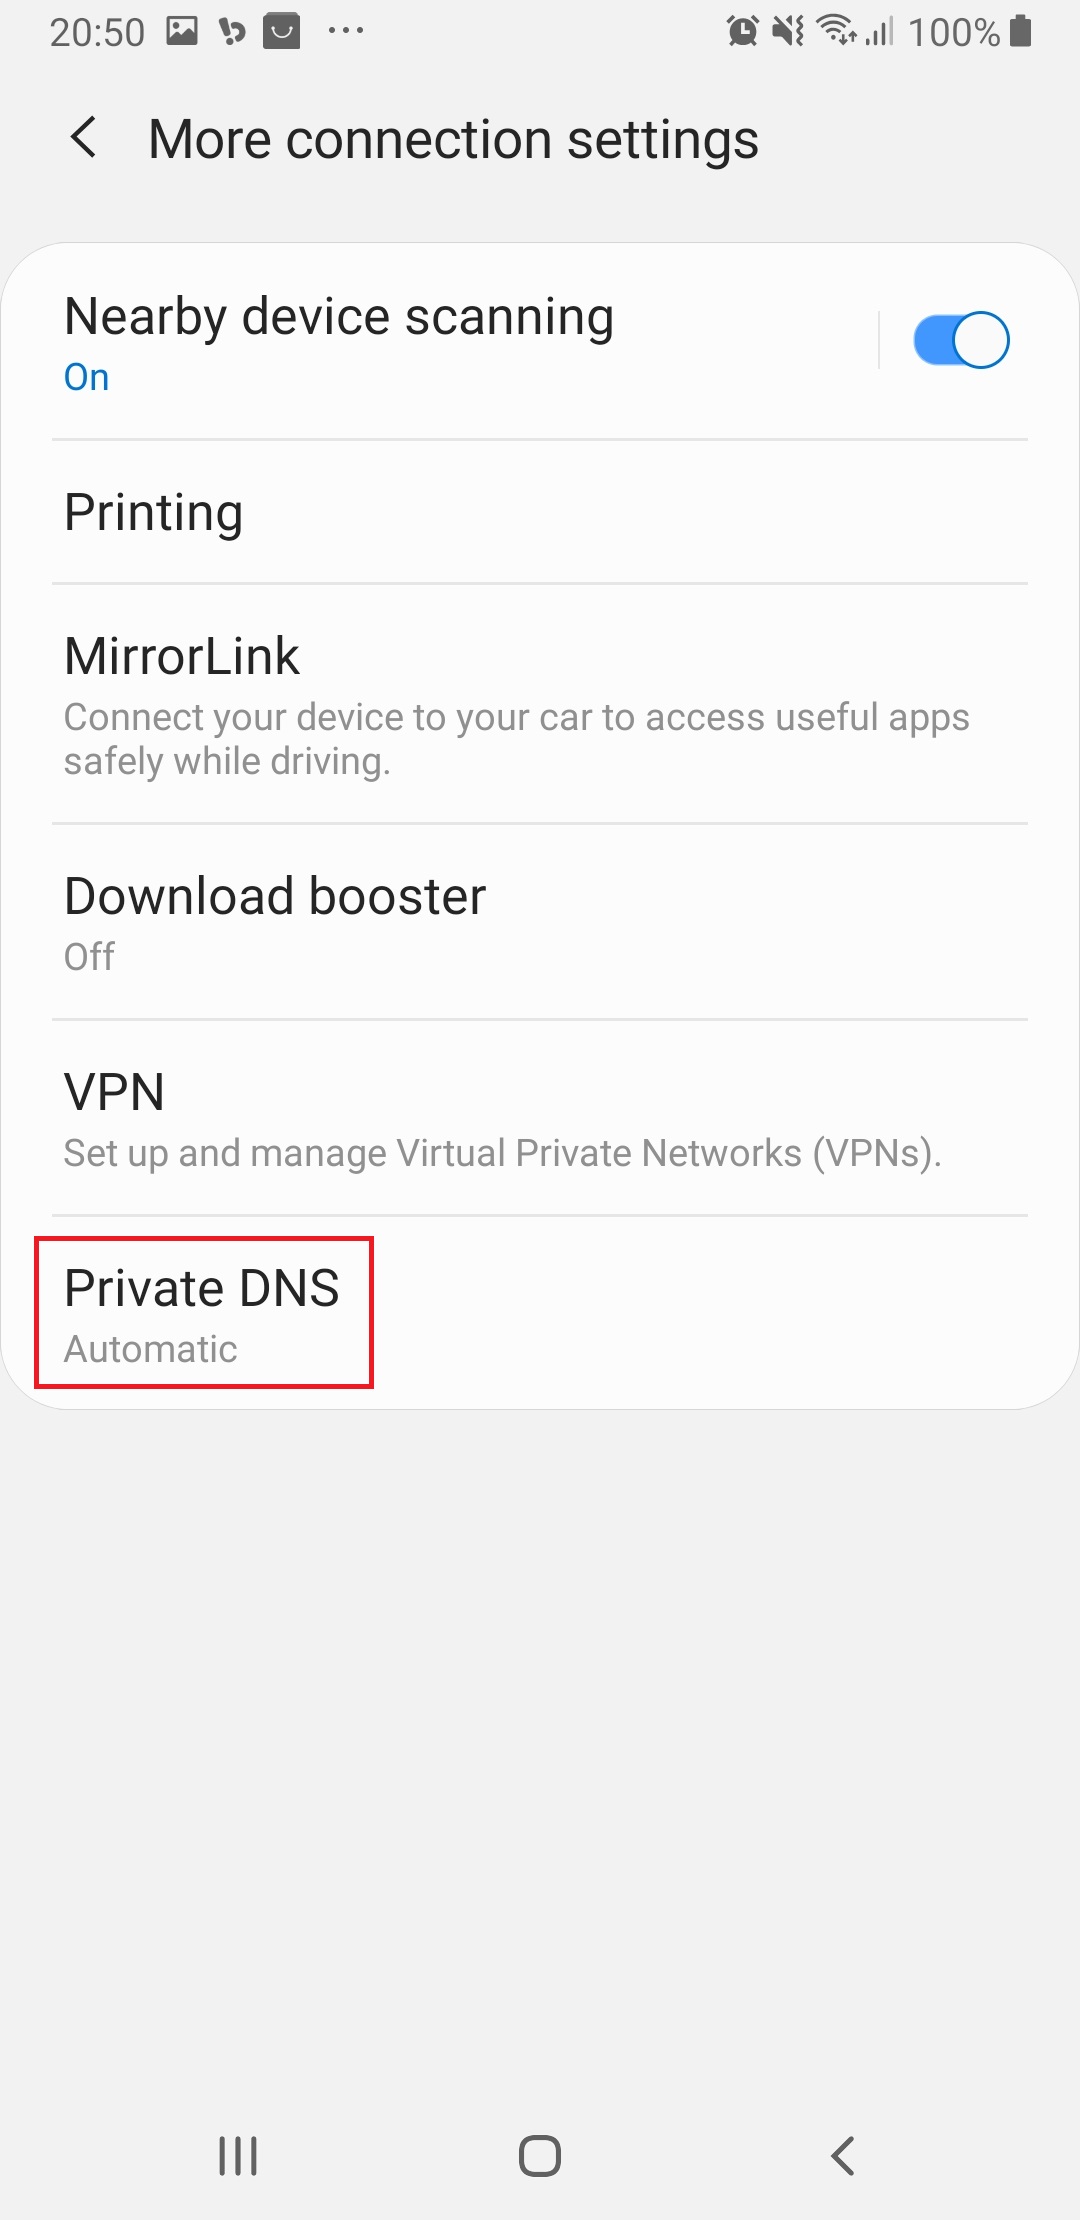 Figure 14. if you schoose more connection settings the set private DNS hostname.jpg